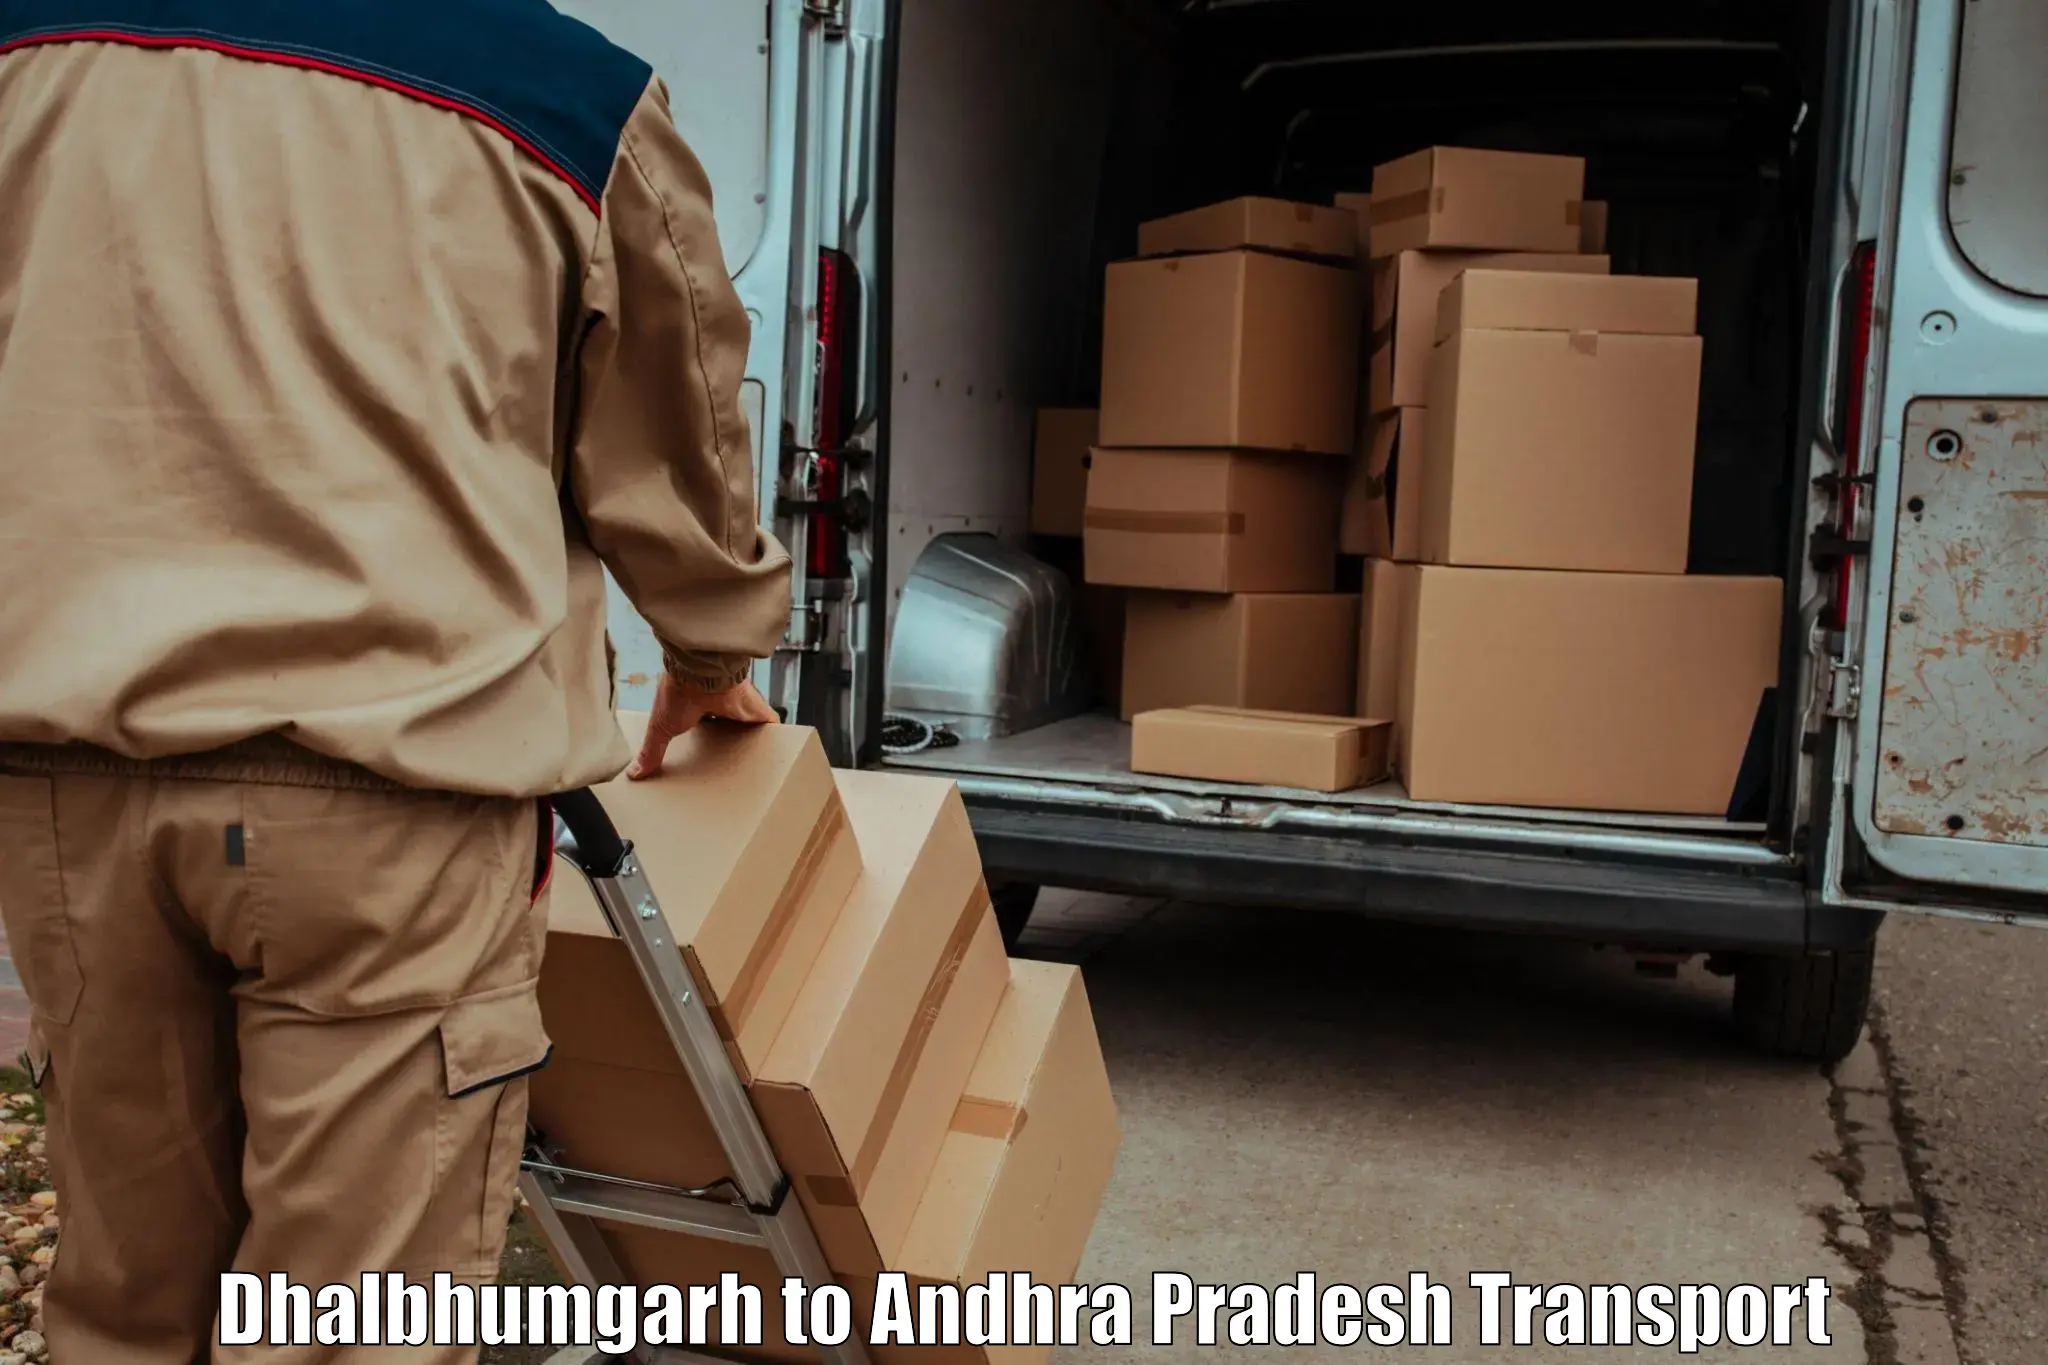 Air freight transport services in Dhalbhumgarh to Kuppam